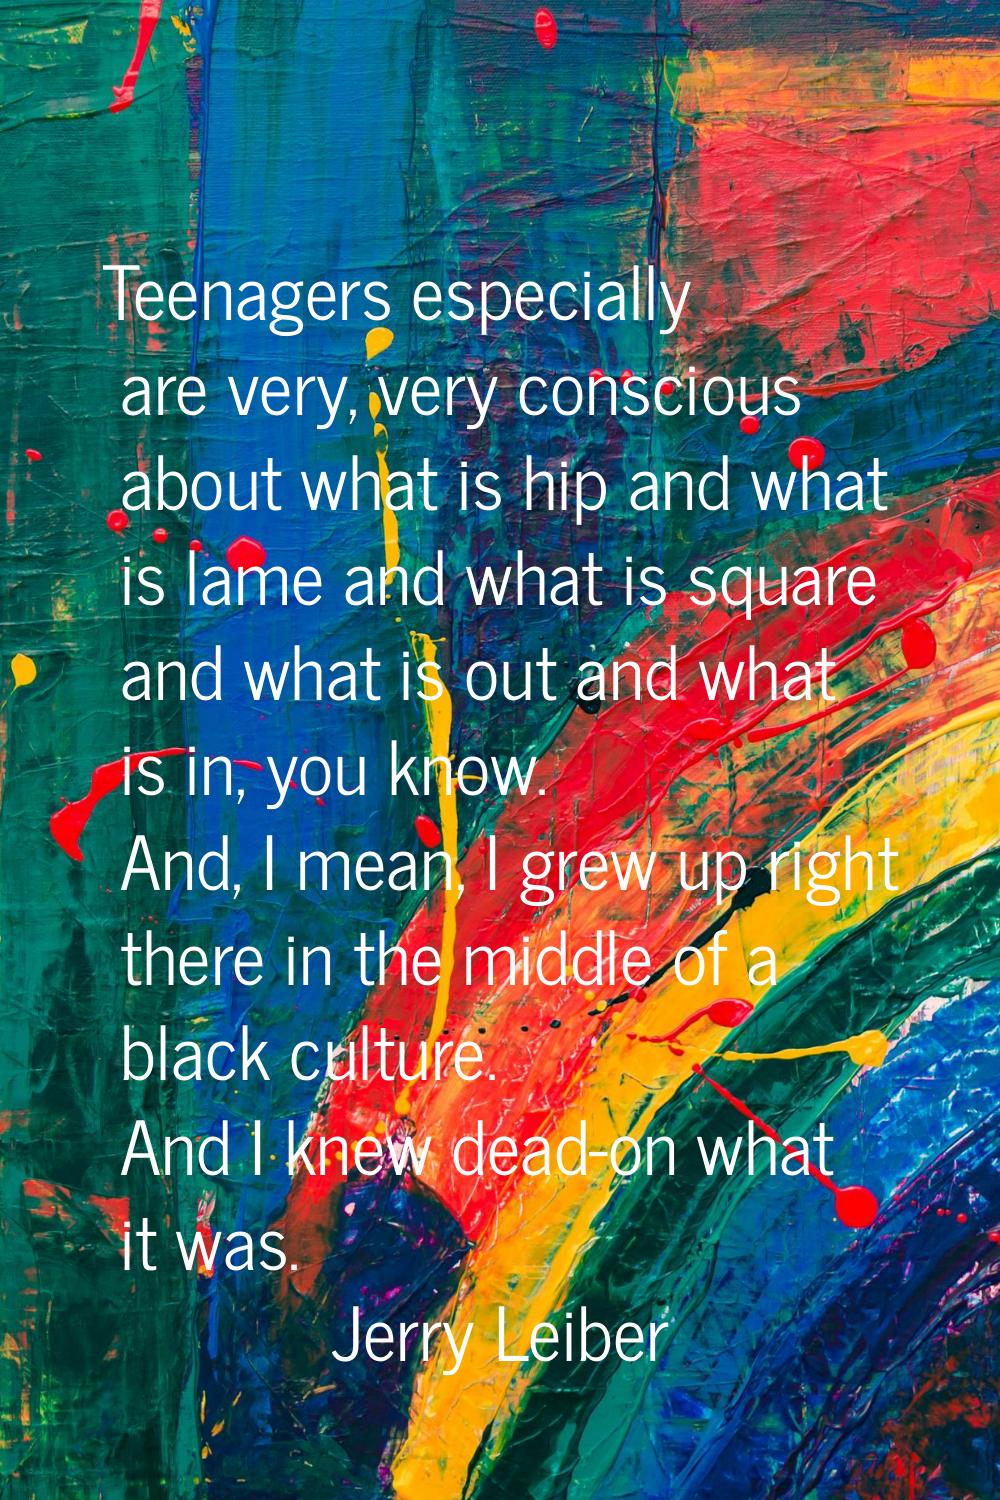 Teenagers especially are very, very conscious about what is hip and what is lame and what is square